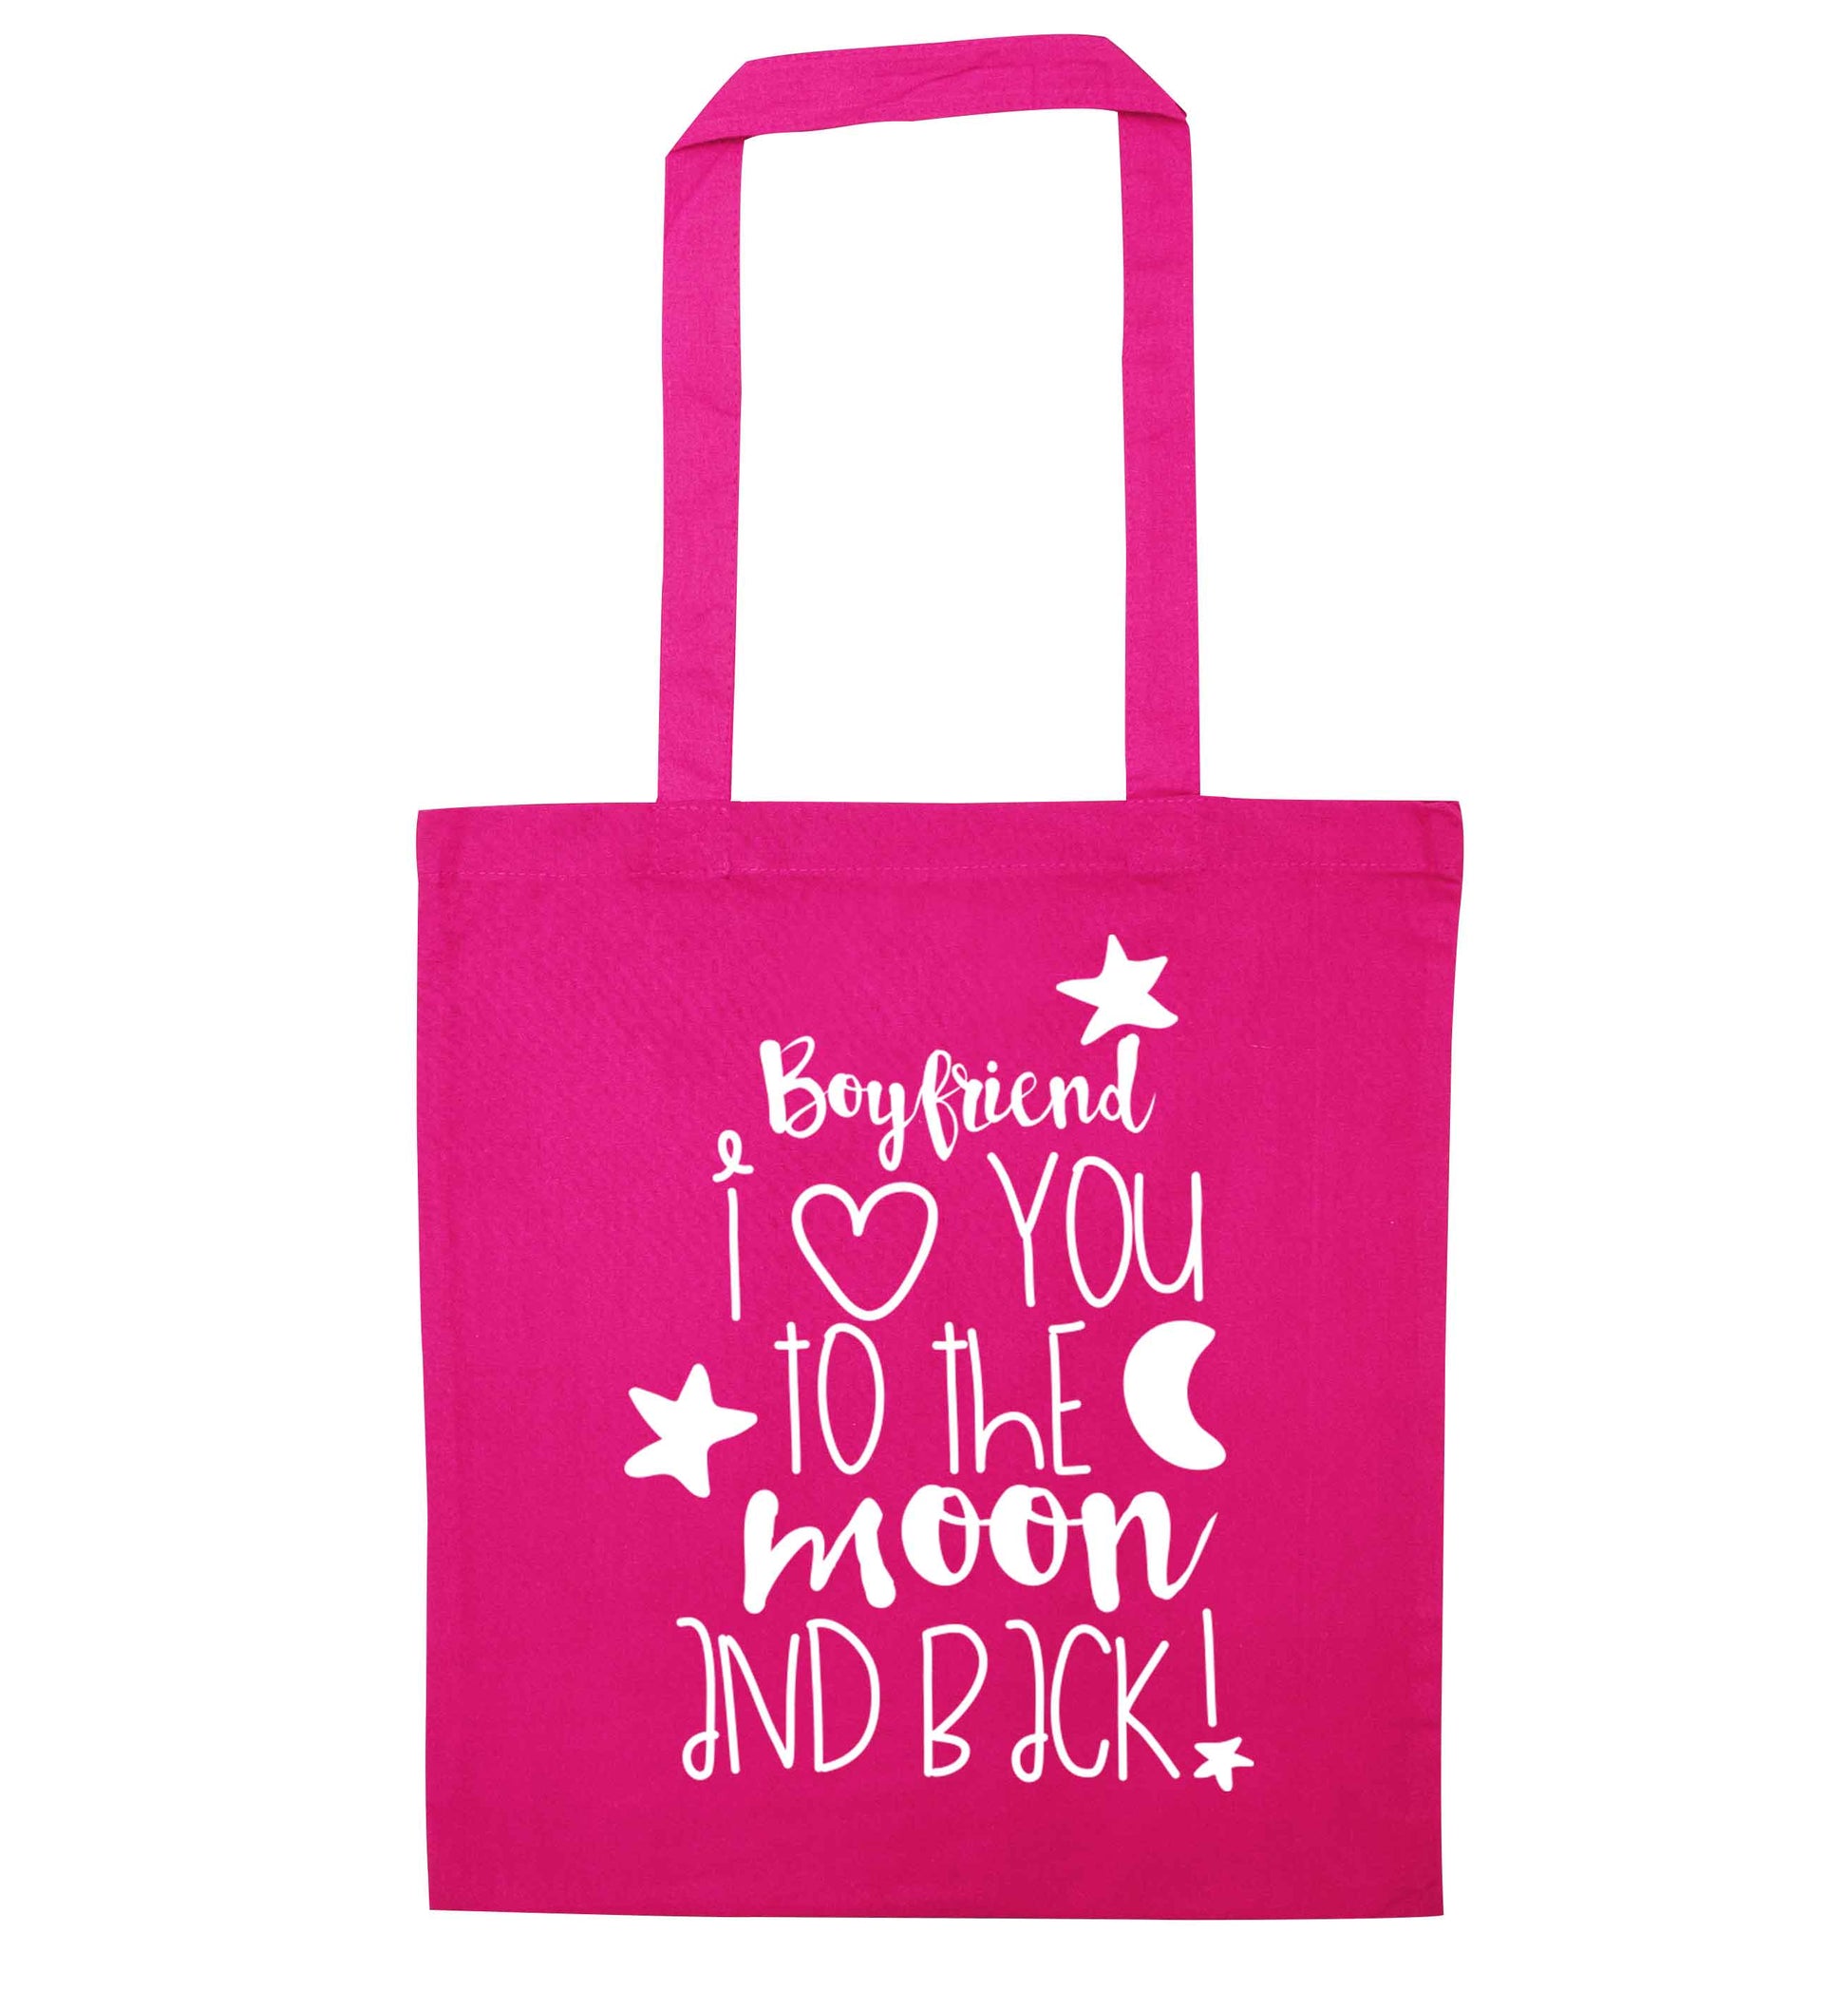 Boyfriend I love you to the moon and back pink tote bag